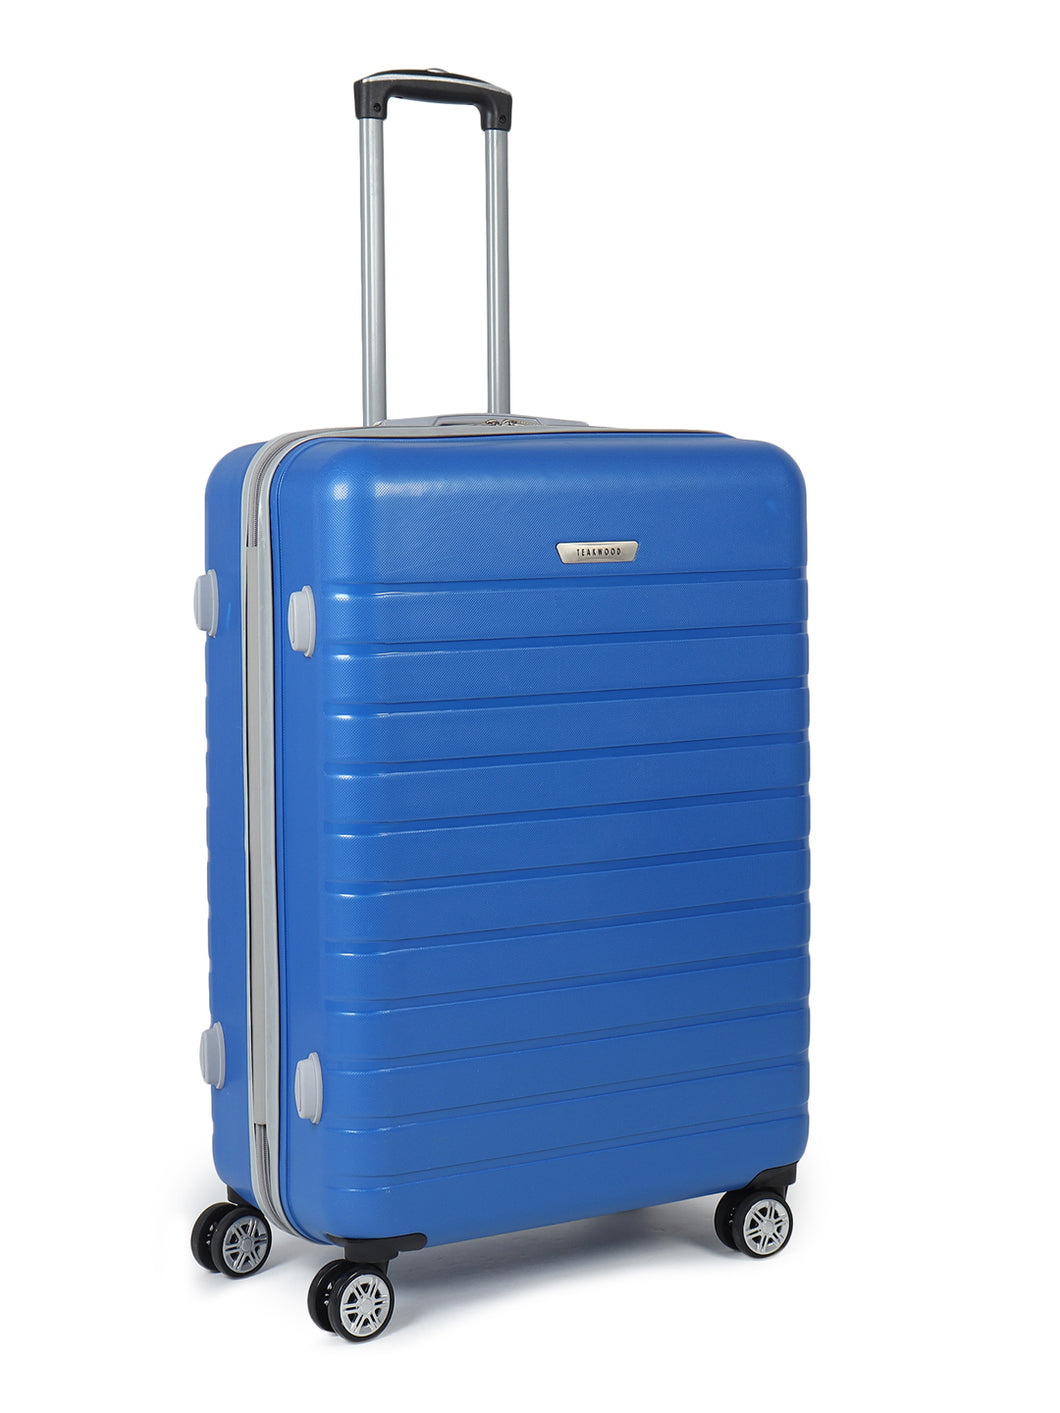 Unisex Blue Textured Hard Sided Cabin Size Trolley Bag